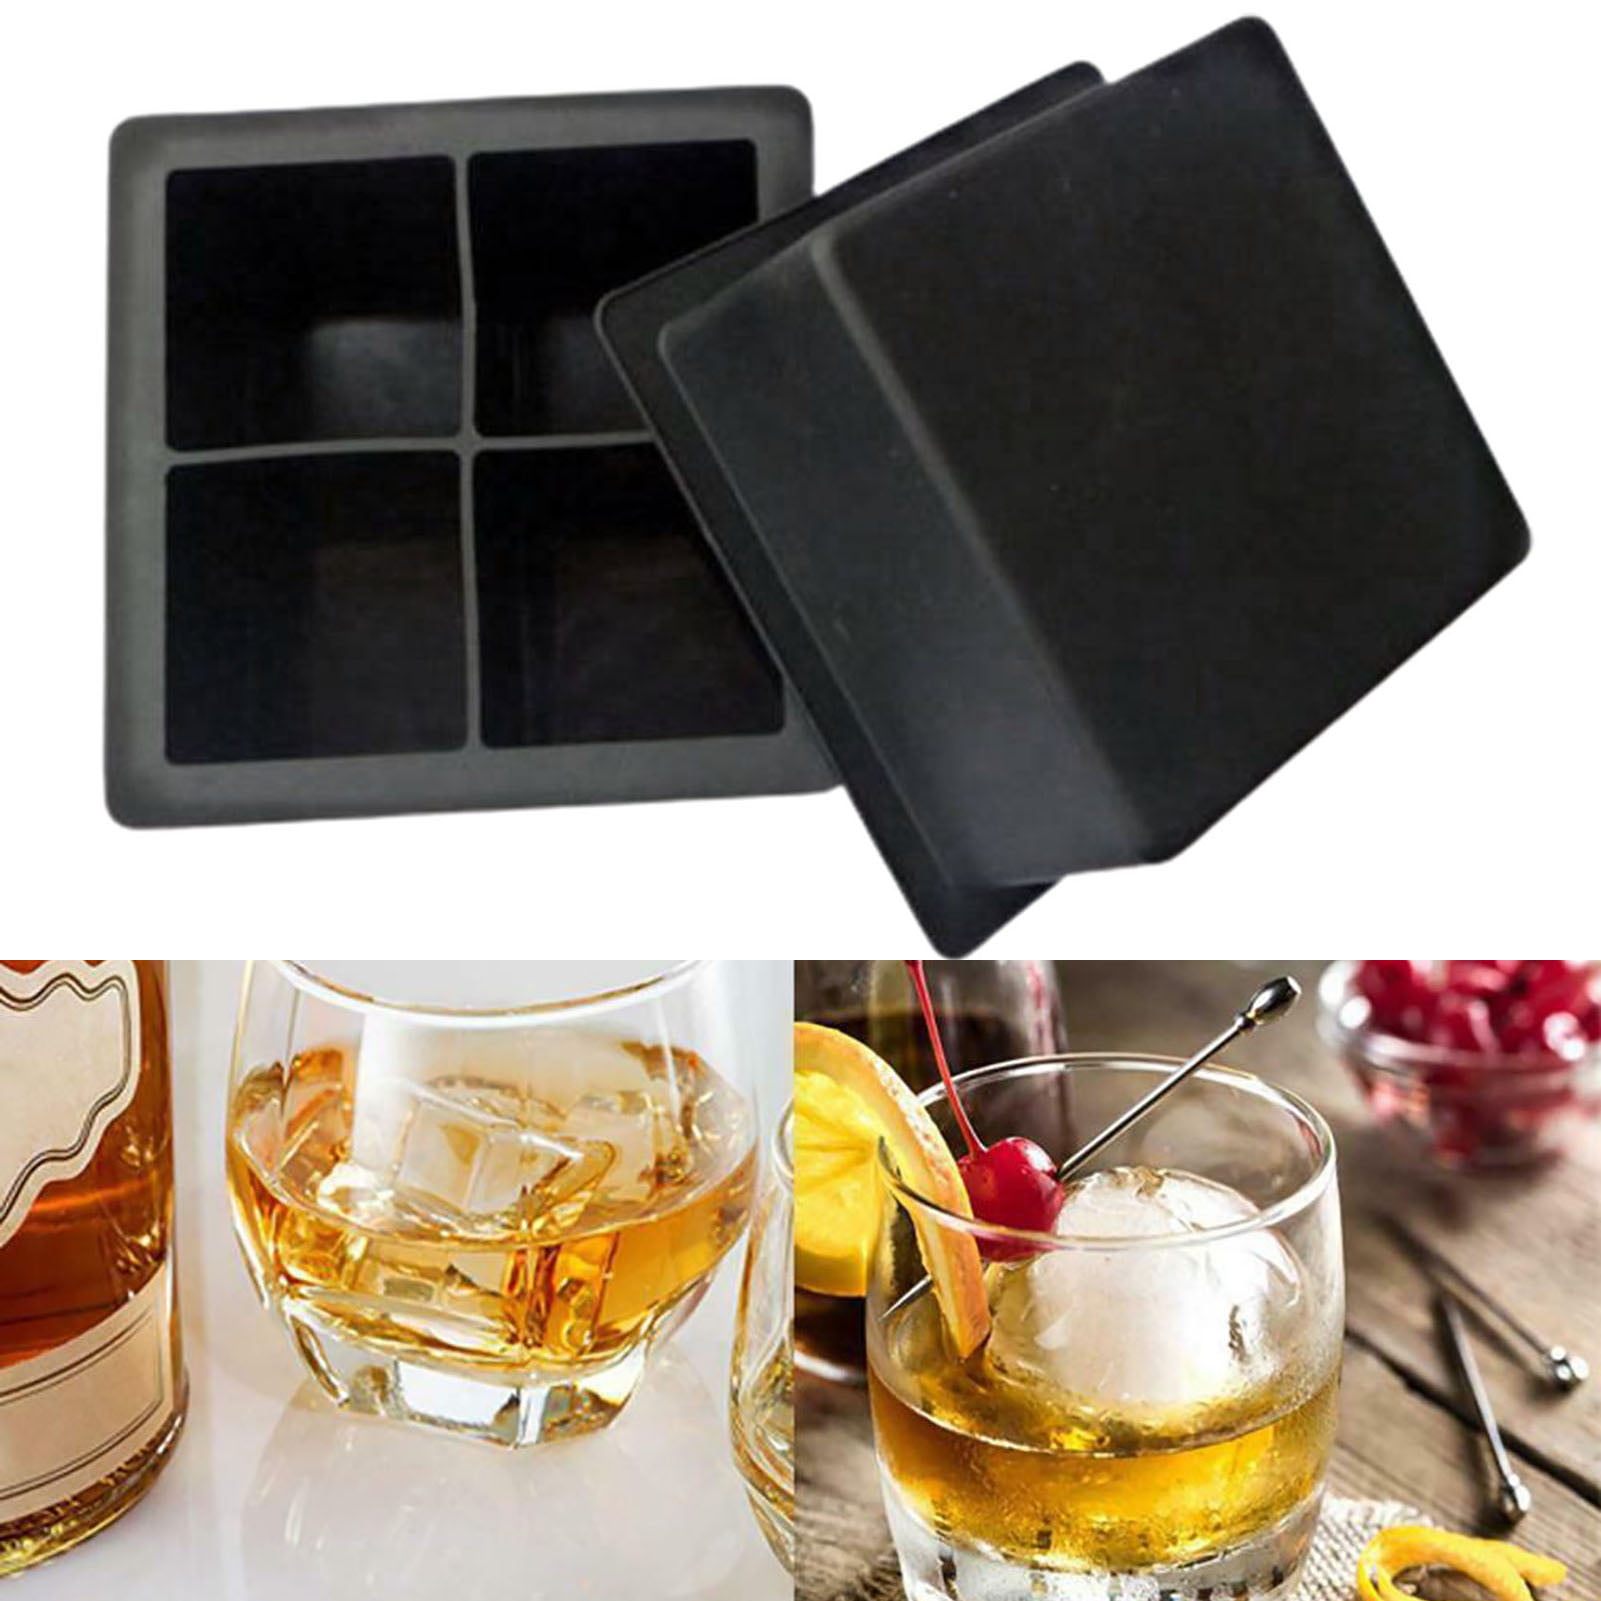 Yin Ice Mold Giant 4 Grids Silicone Square Ice Cube Maker Mold for Kitchen  